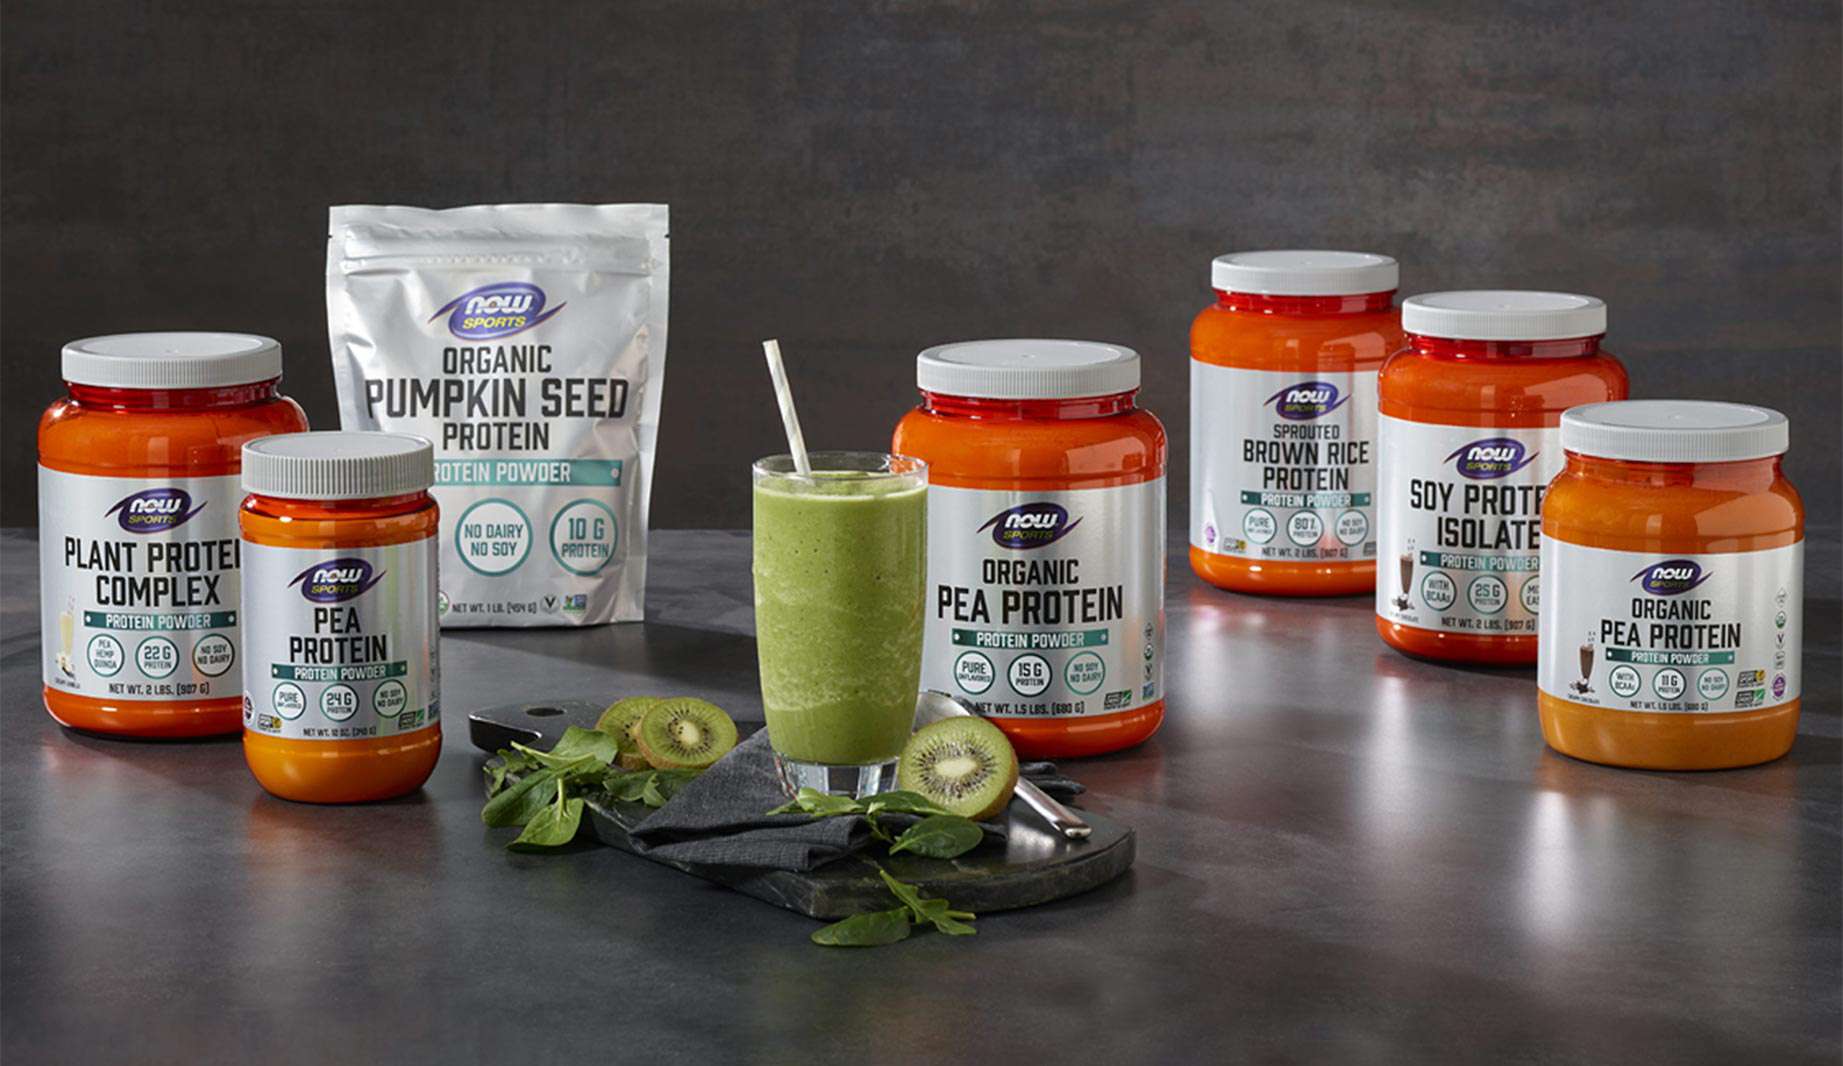 NOW Sports Products, Plant Protein complete, Pea Protein, Pumpkin Seed Protein, Brown Rice Protein, Soy Protein Isolate